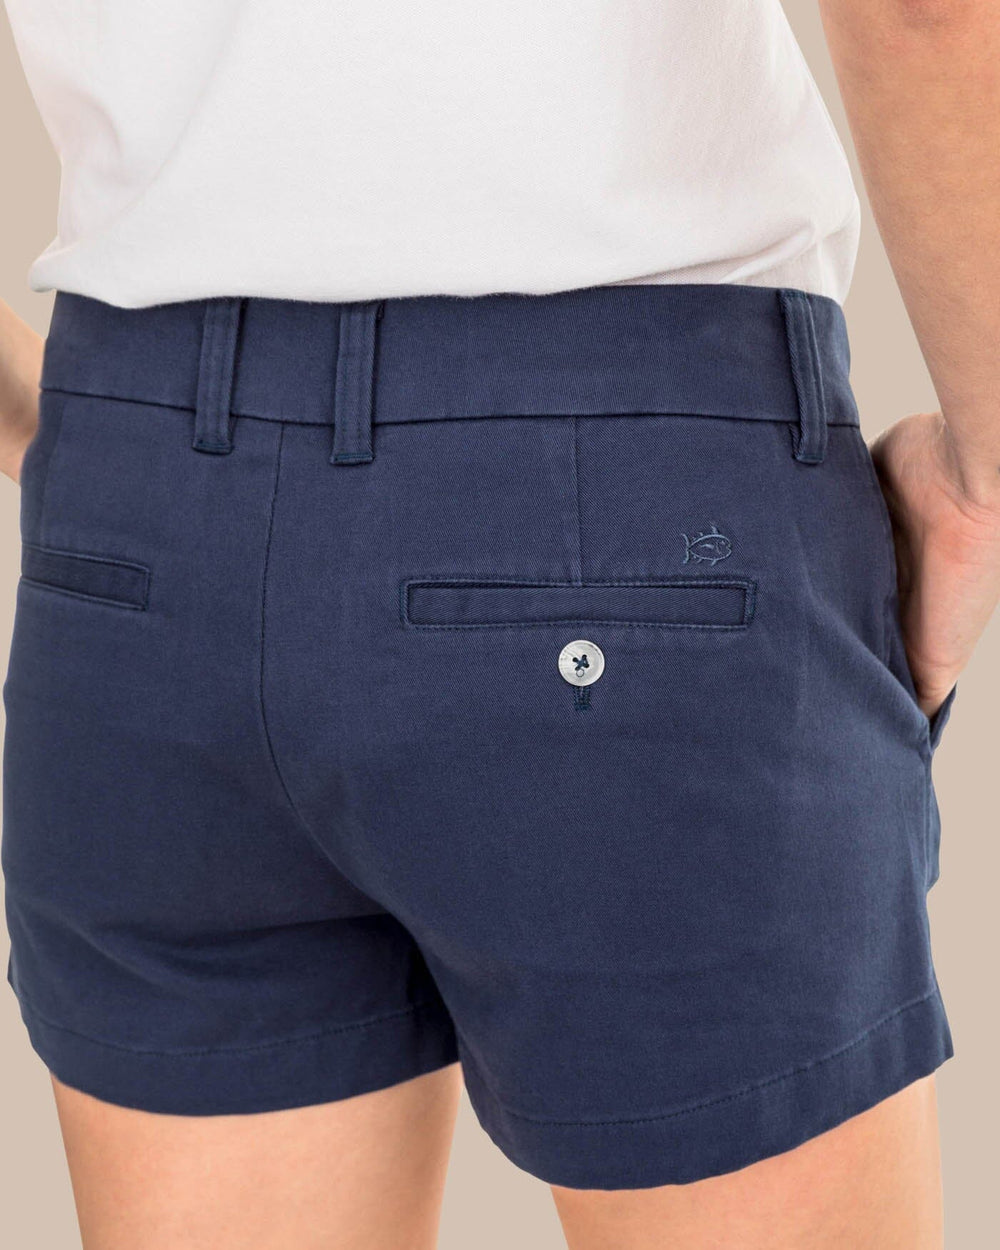 The pocket view of the Women's Navy 3 Inch Leah Short by Southern Tide - Nautical Navy